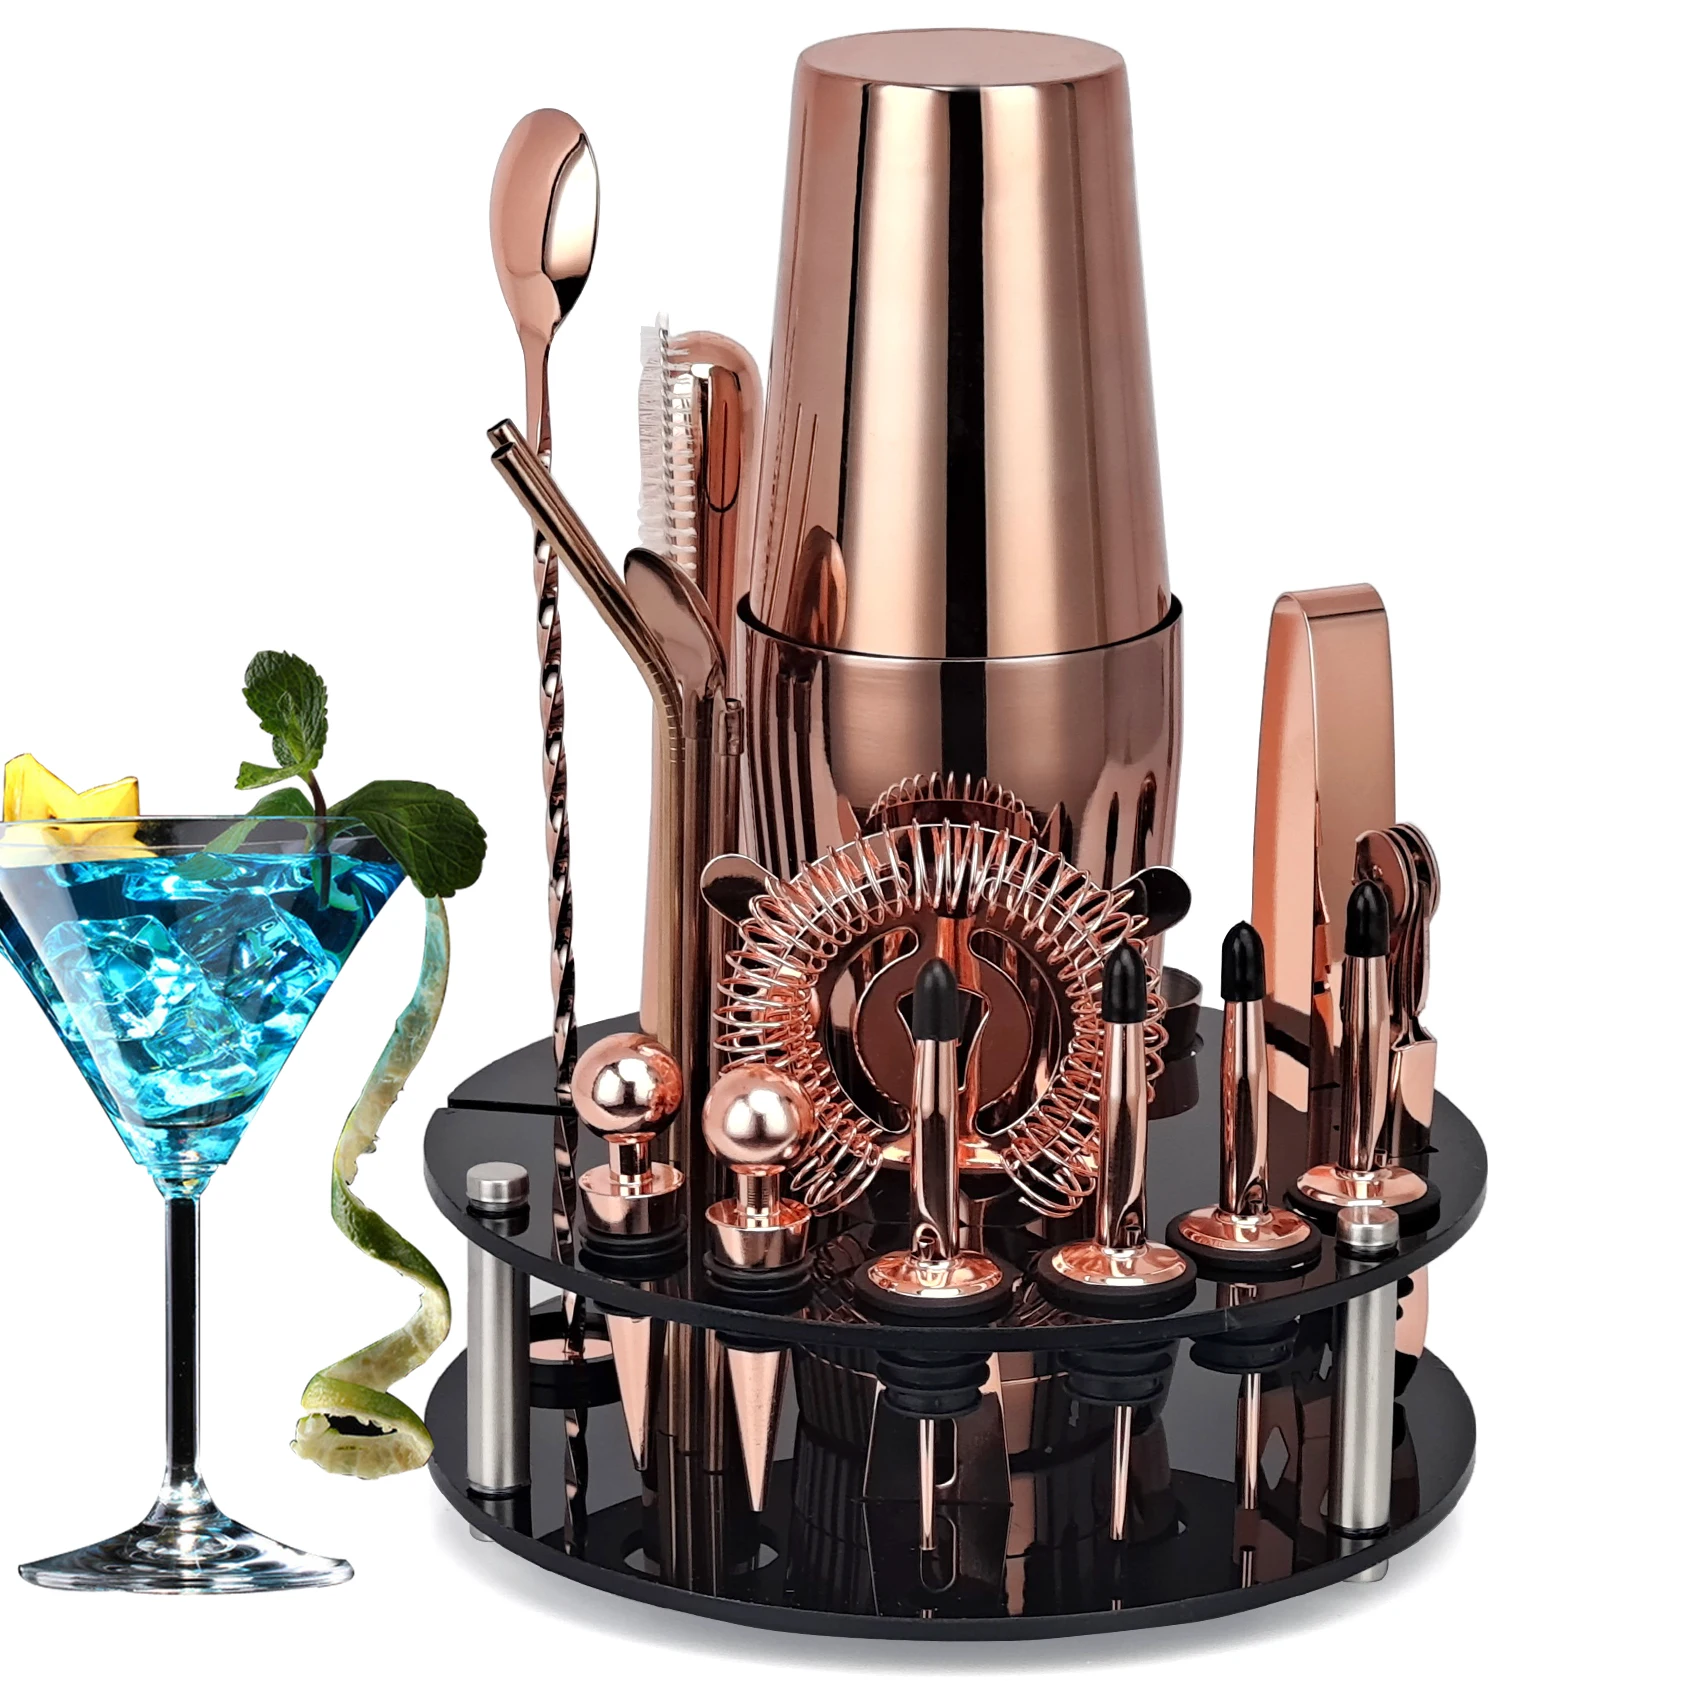 Bartender Kit,20-Piece Rose Gold Cocktail Shaker Set With Rotating Acrylic Stand,For Mixed Drinks Martini Home Bar Tools